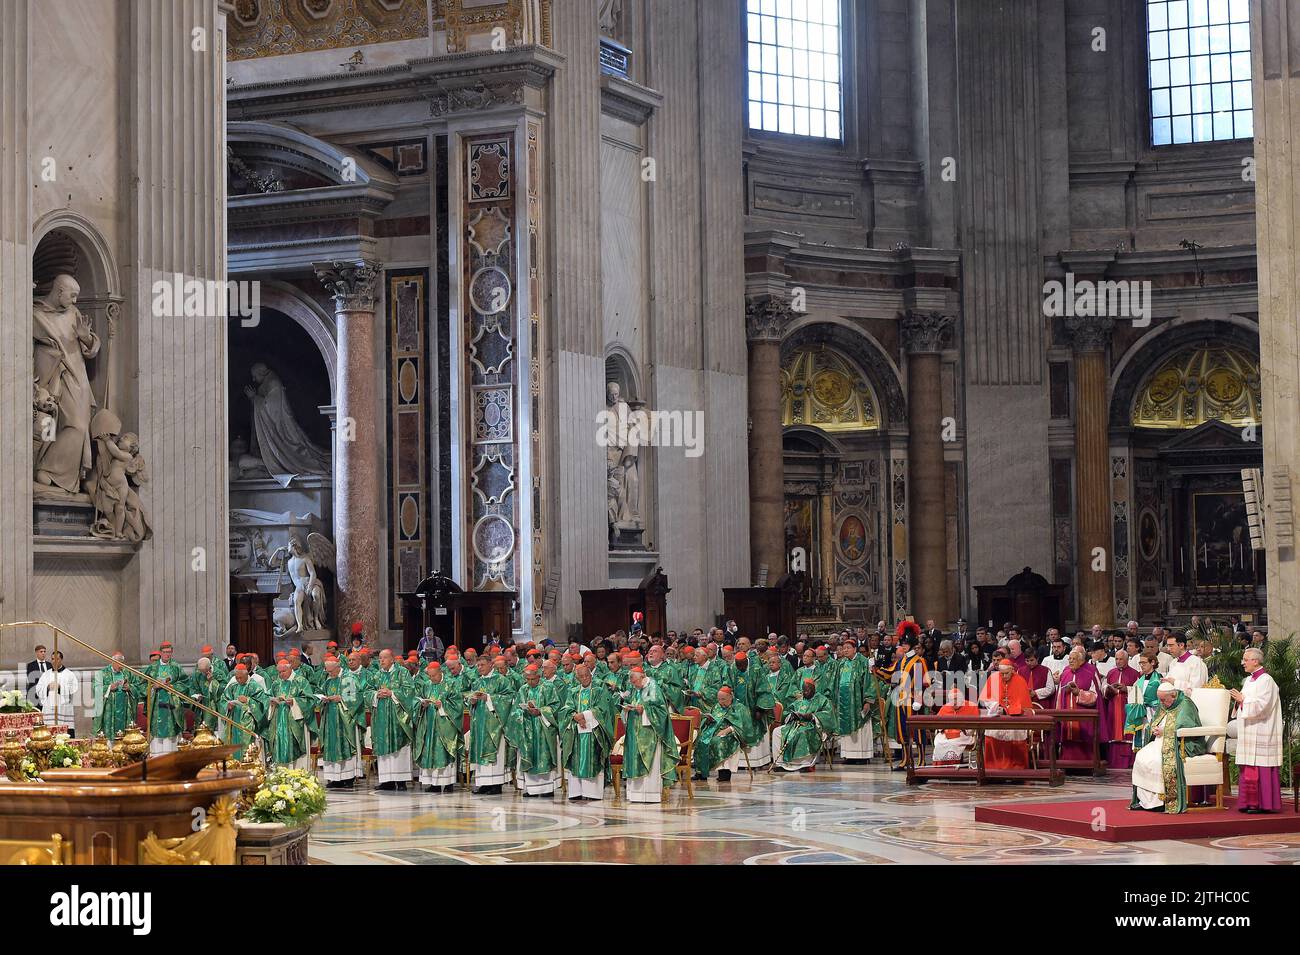 St. Peter’s Basilica, Vatican, August 30, 2022. Pope Francis presided over a Mass with the new Cardinals and College of Cardinals in St. Peter’s Basilica, Vatican on August 30, 2022. The celebration followed Saturday's Consistory for the creation of new Cardinals and two days of meetings of all the Cardinals to discuss Praedicate Evangelium, the new Apostolic Constitution of the Roman Curia. Photo by Eric Vandeville/ABACAPRESS.COM Stock Photo